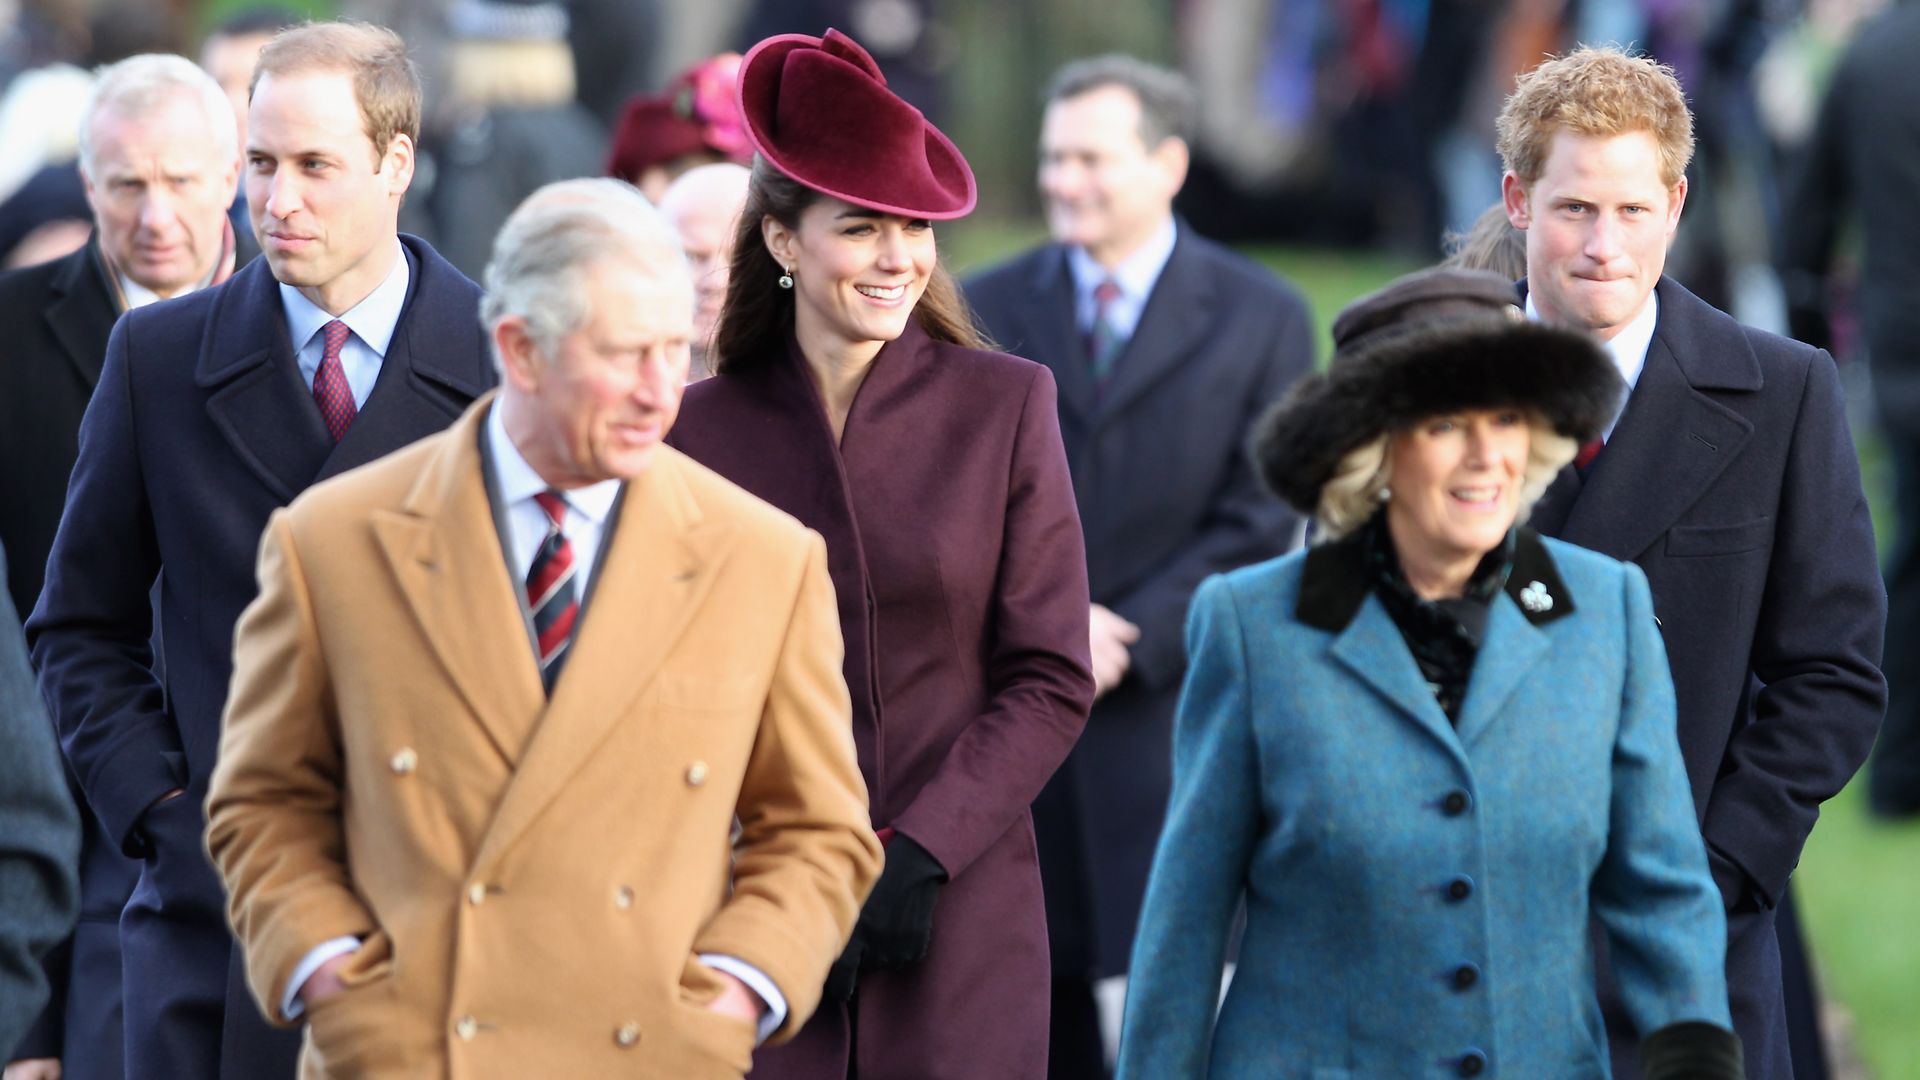 William, Kate and Harry walk behind Charles and Camilla